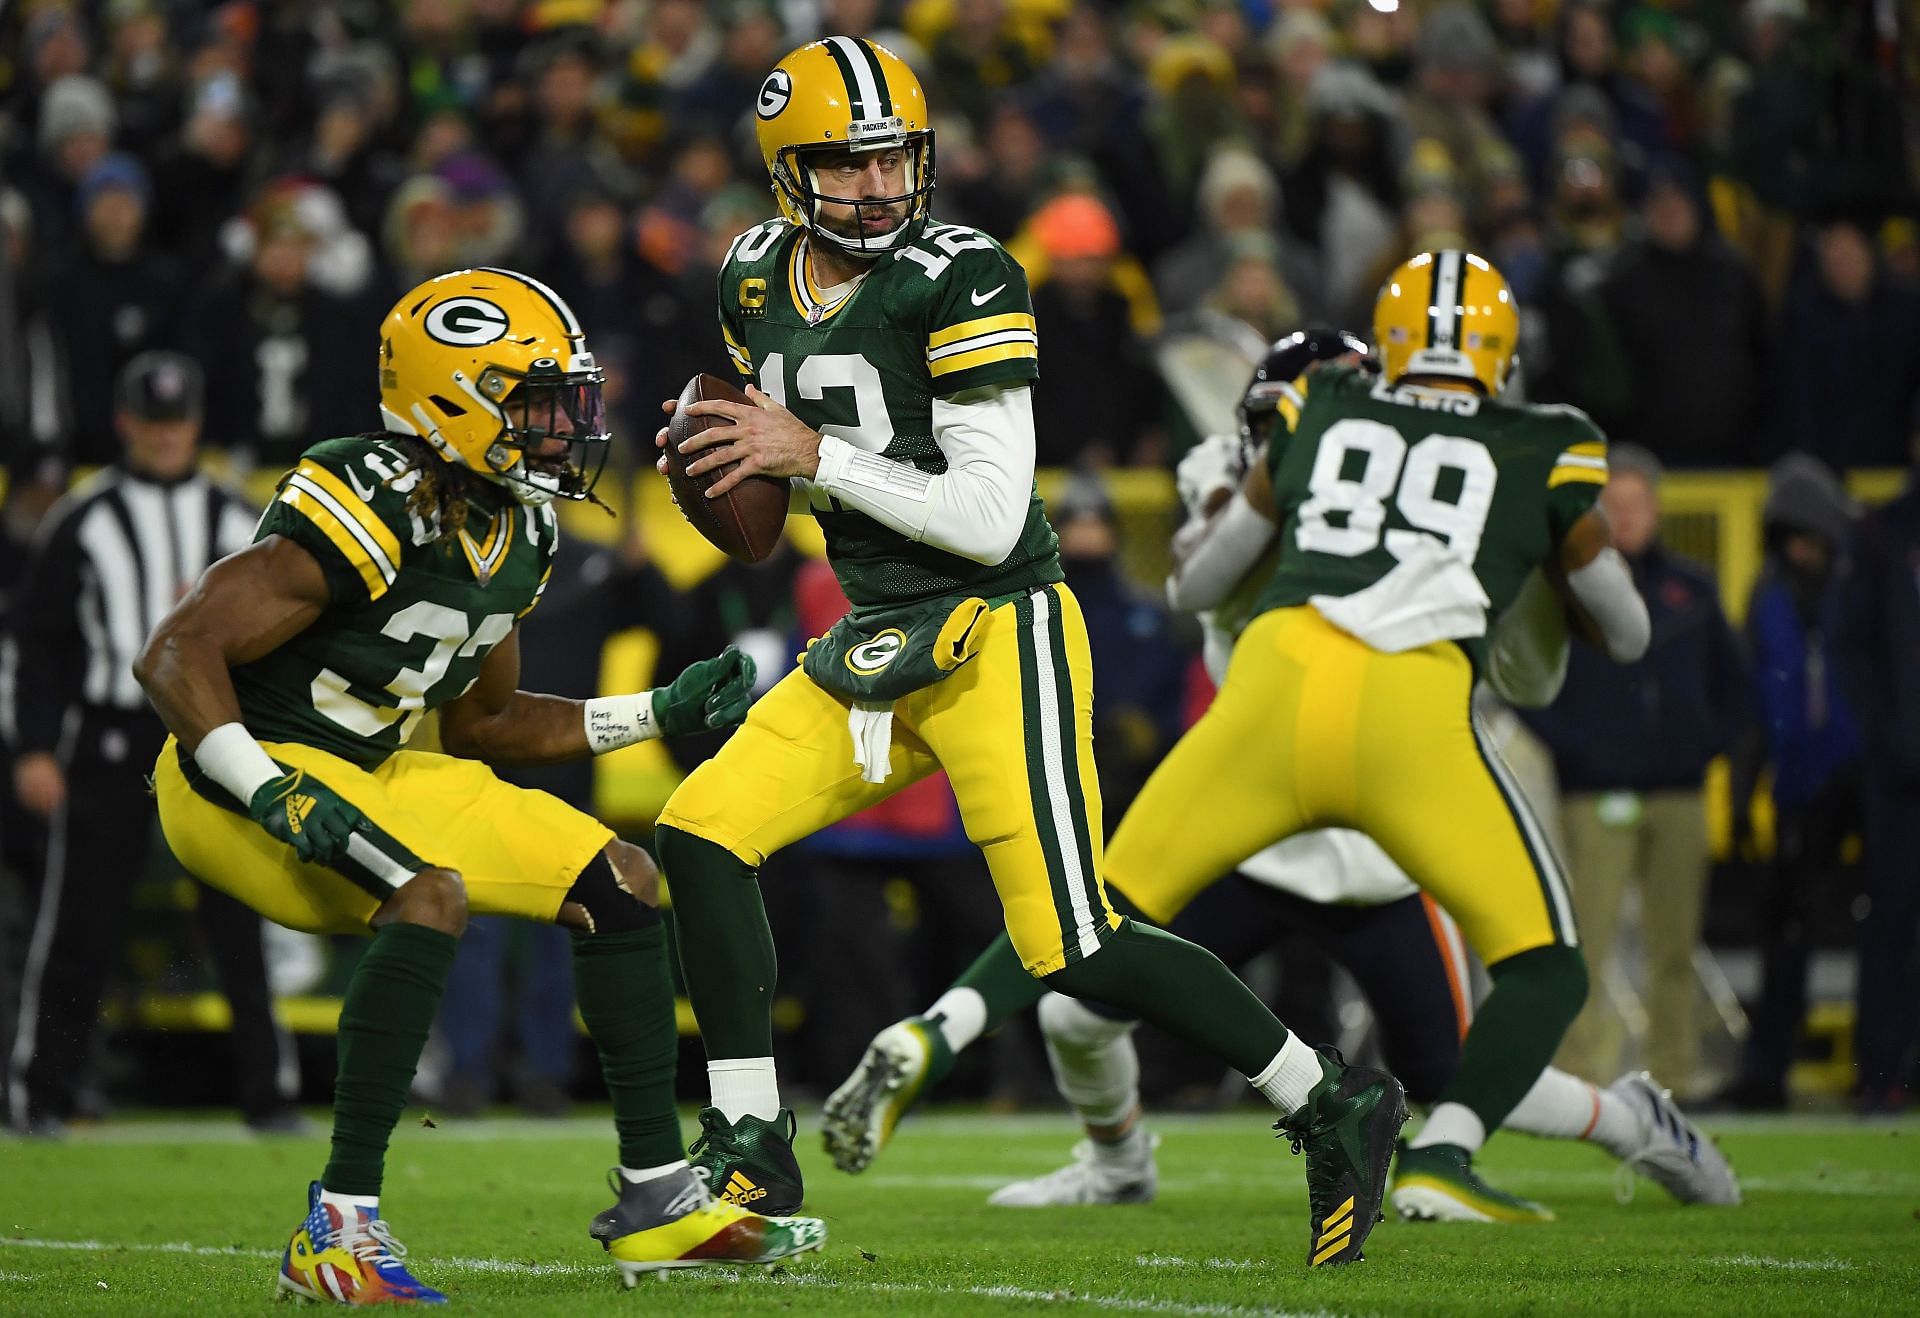 Rodgers has led the Packers to the No.1 seed in the NFC